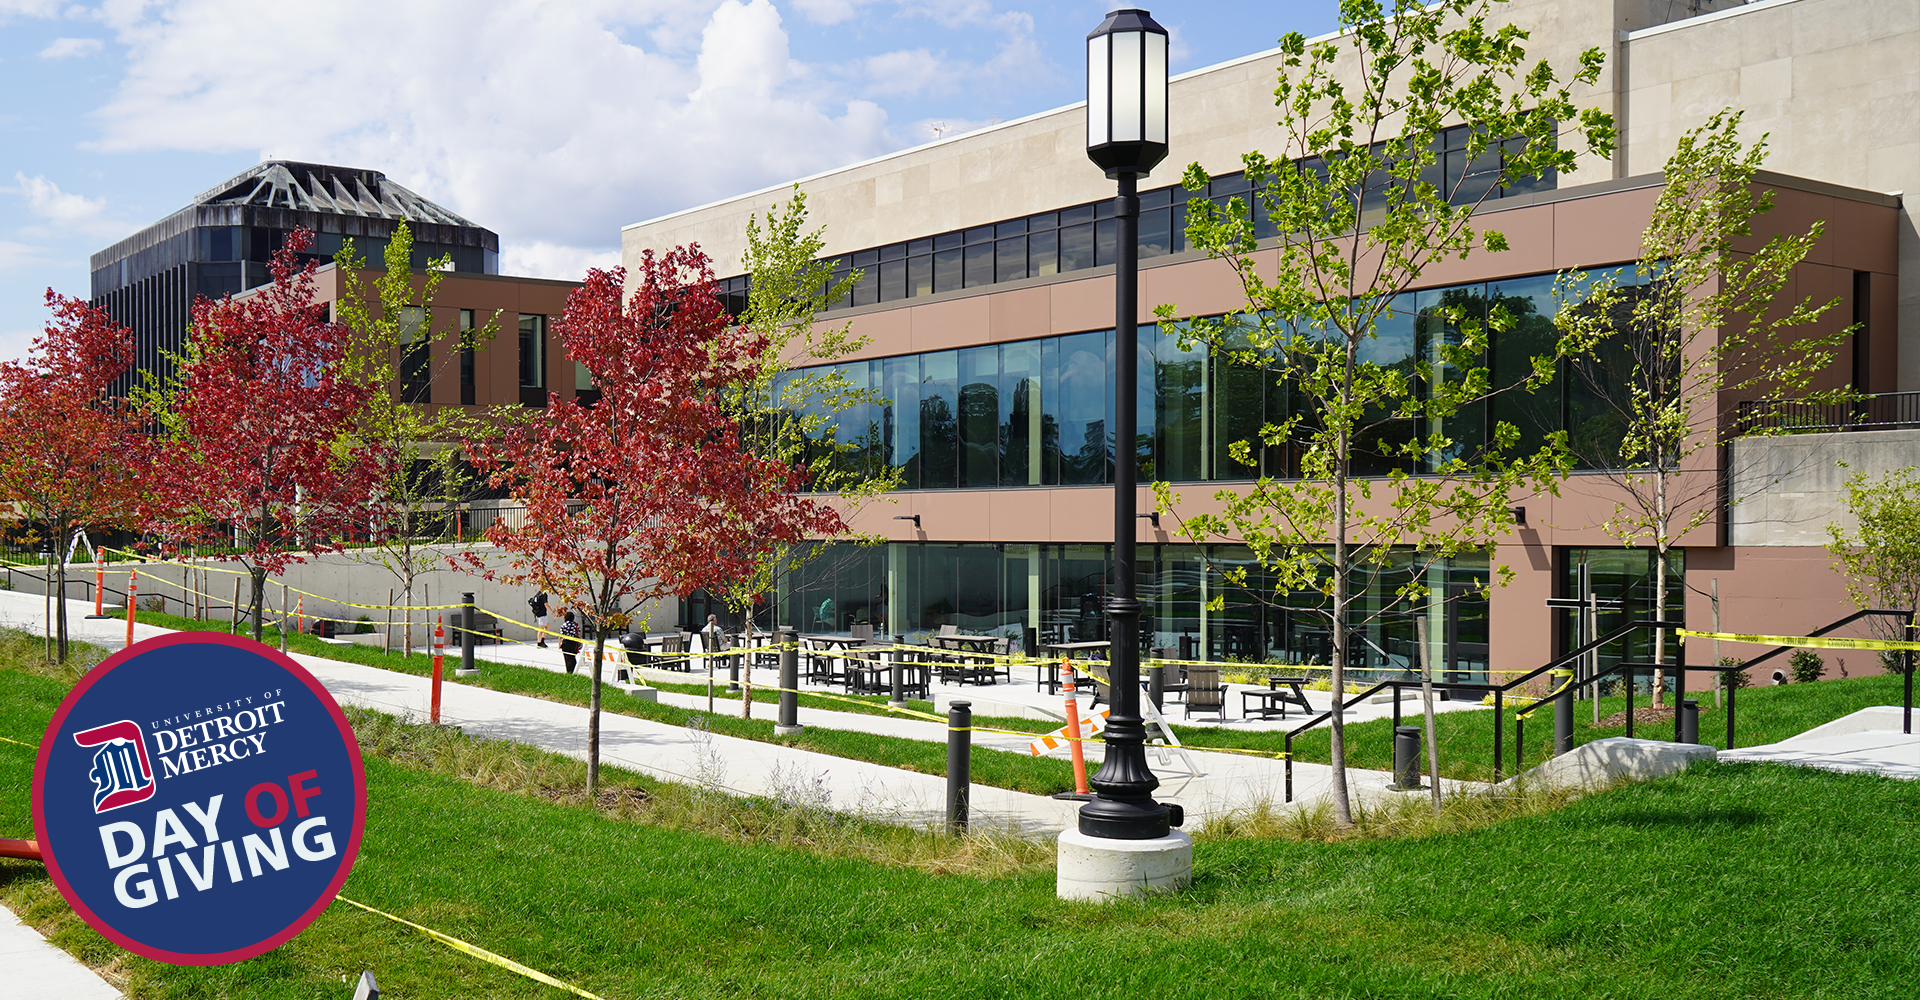 An outdoor photo of the Student Union plaza with trees and lamp posts in front. A University of Detroit Mercy Day of Giving sticker is in the lower left hand corner.